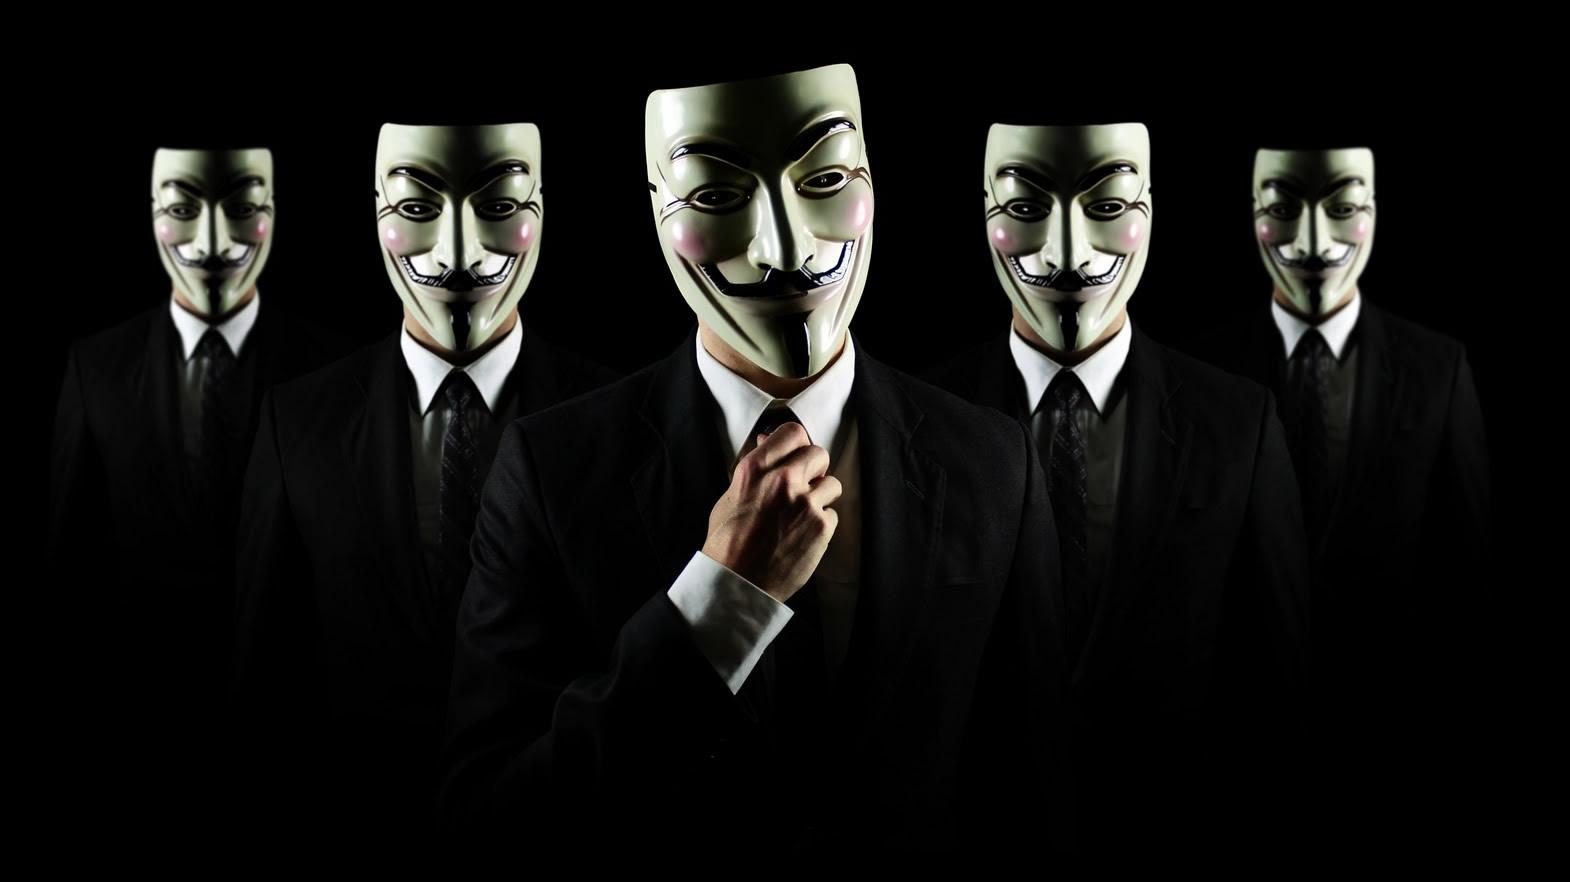 HD Anonymous Hackers Wallpaper and Photo. HD Others Wallpaper